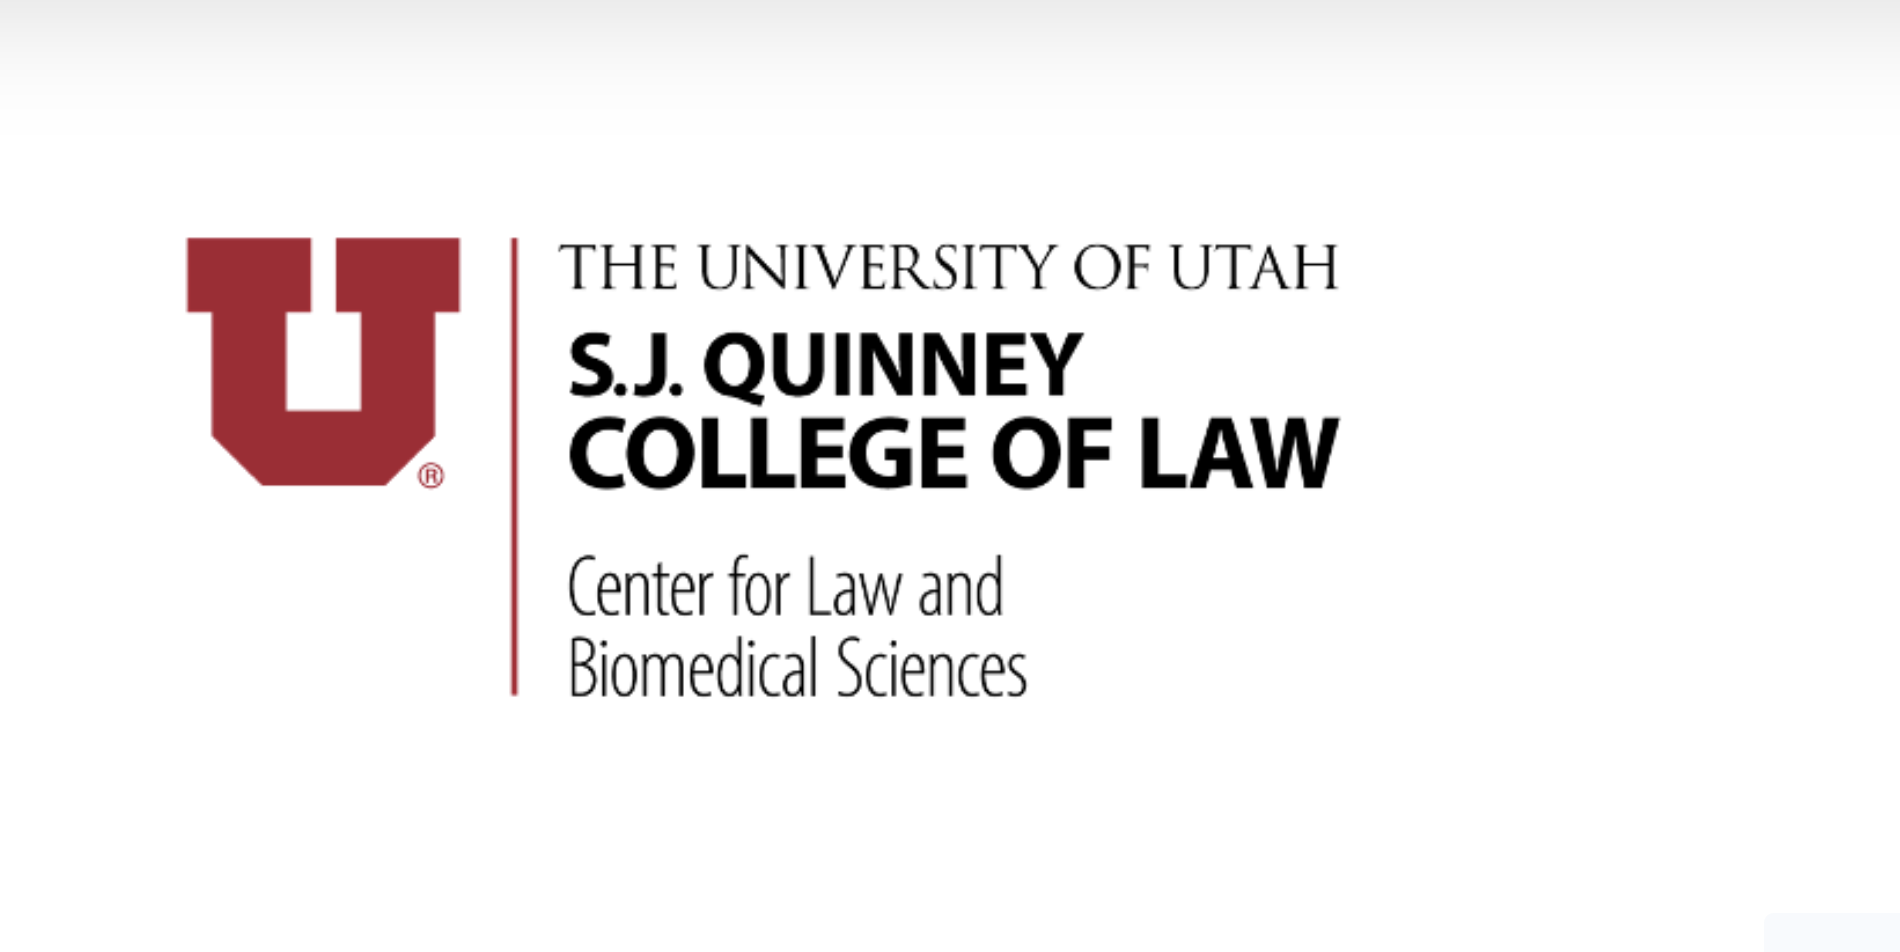 Center for Law and Biomedical Sciences